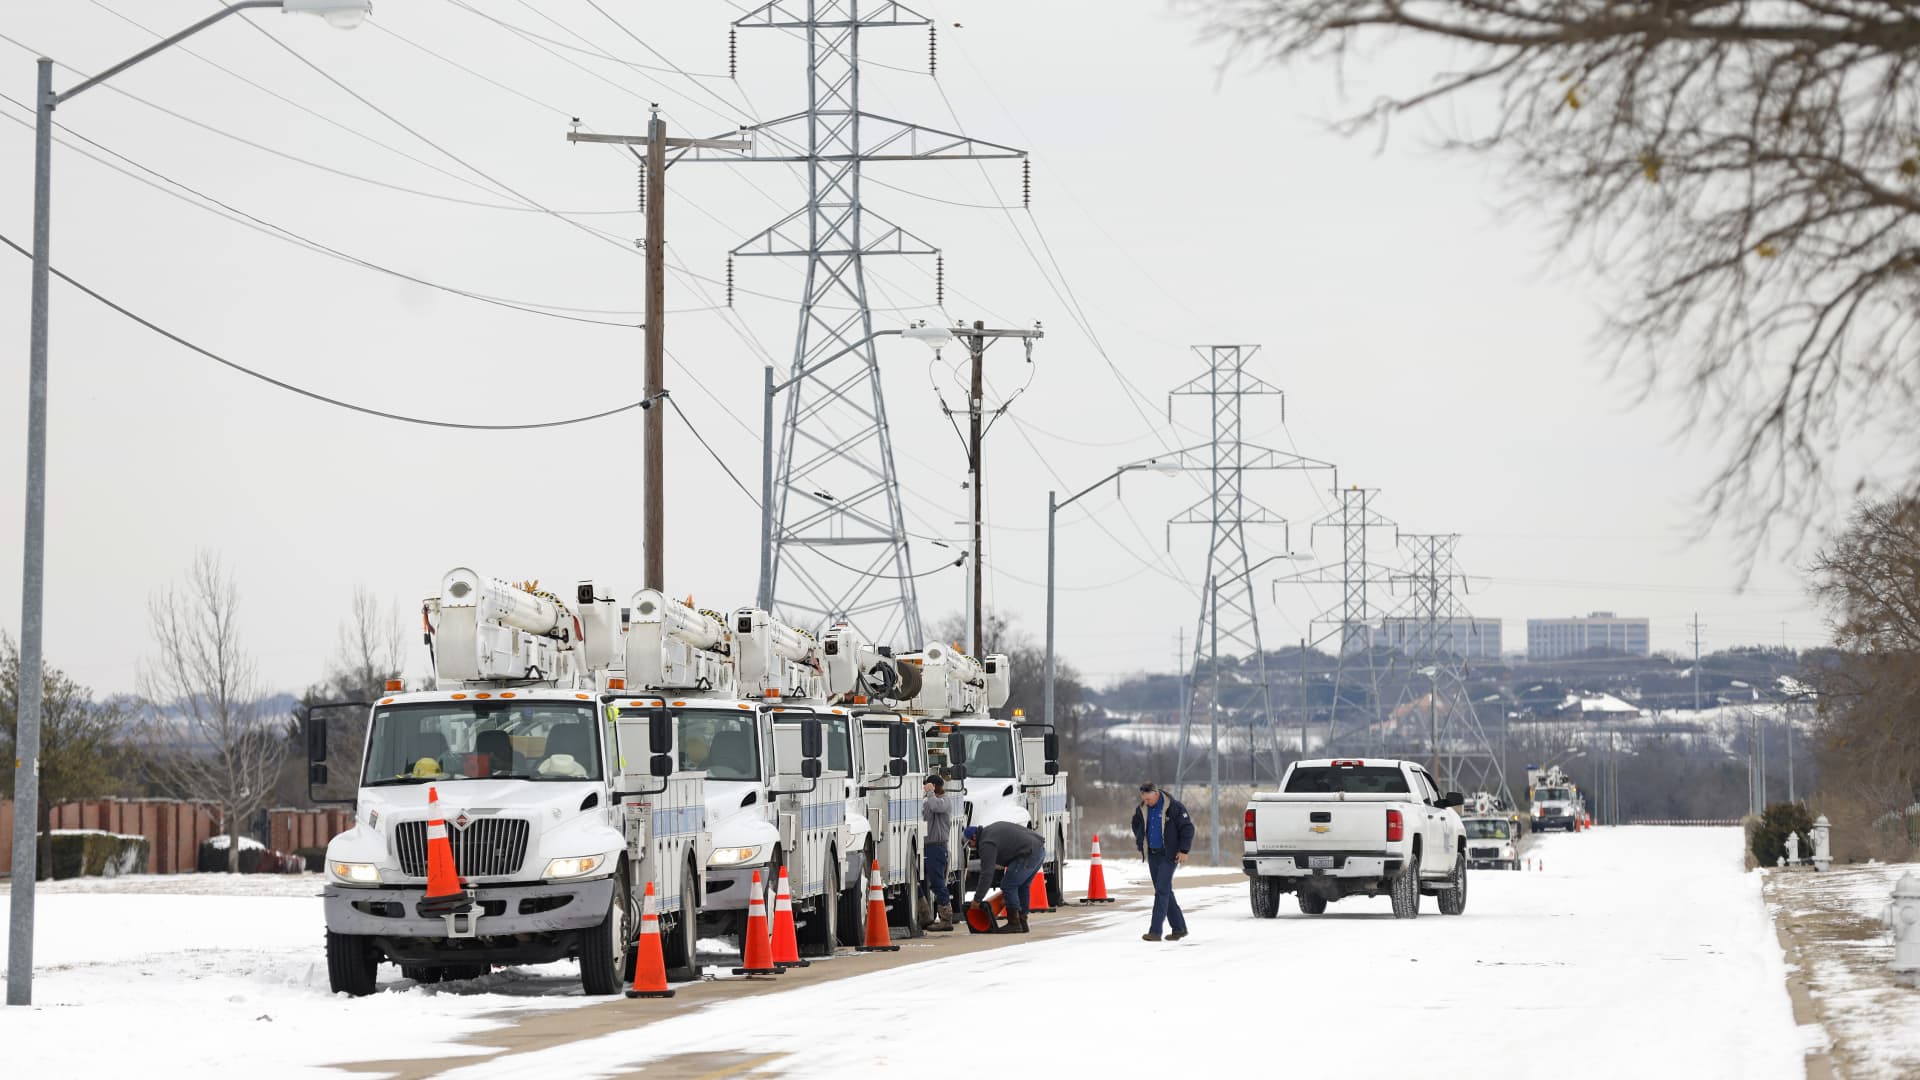 Pike Electric service trucks line up after a snow storm on February 16, 2021 in Fort Worth, Texas. Winter storm Uri has brought historic cold weather and power outages to Texas as storms have swept across 26 states with a mix of freezing temperatures and precipitation.